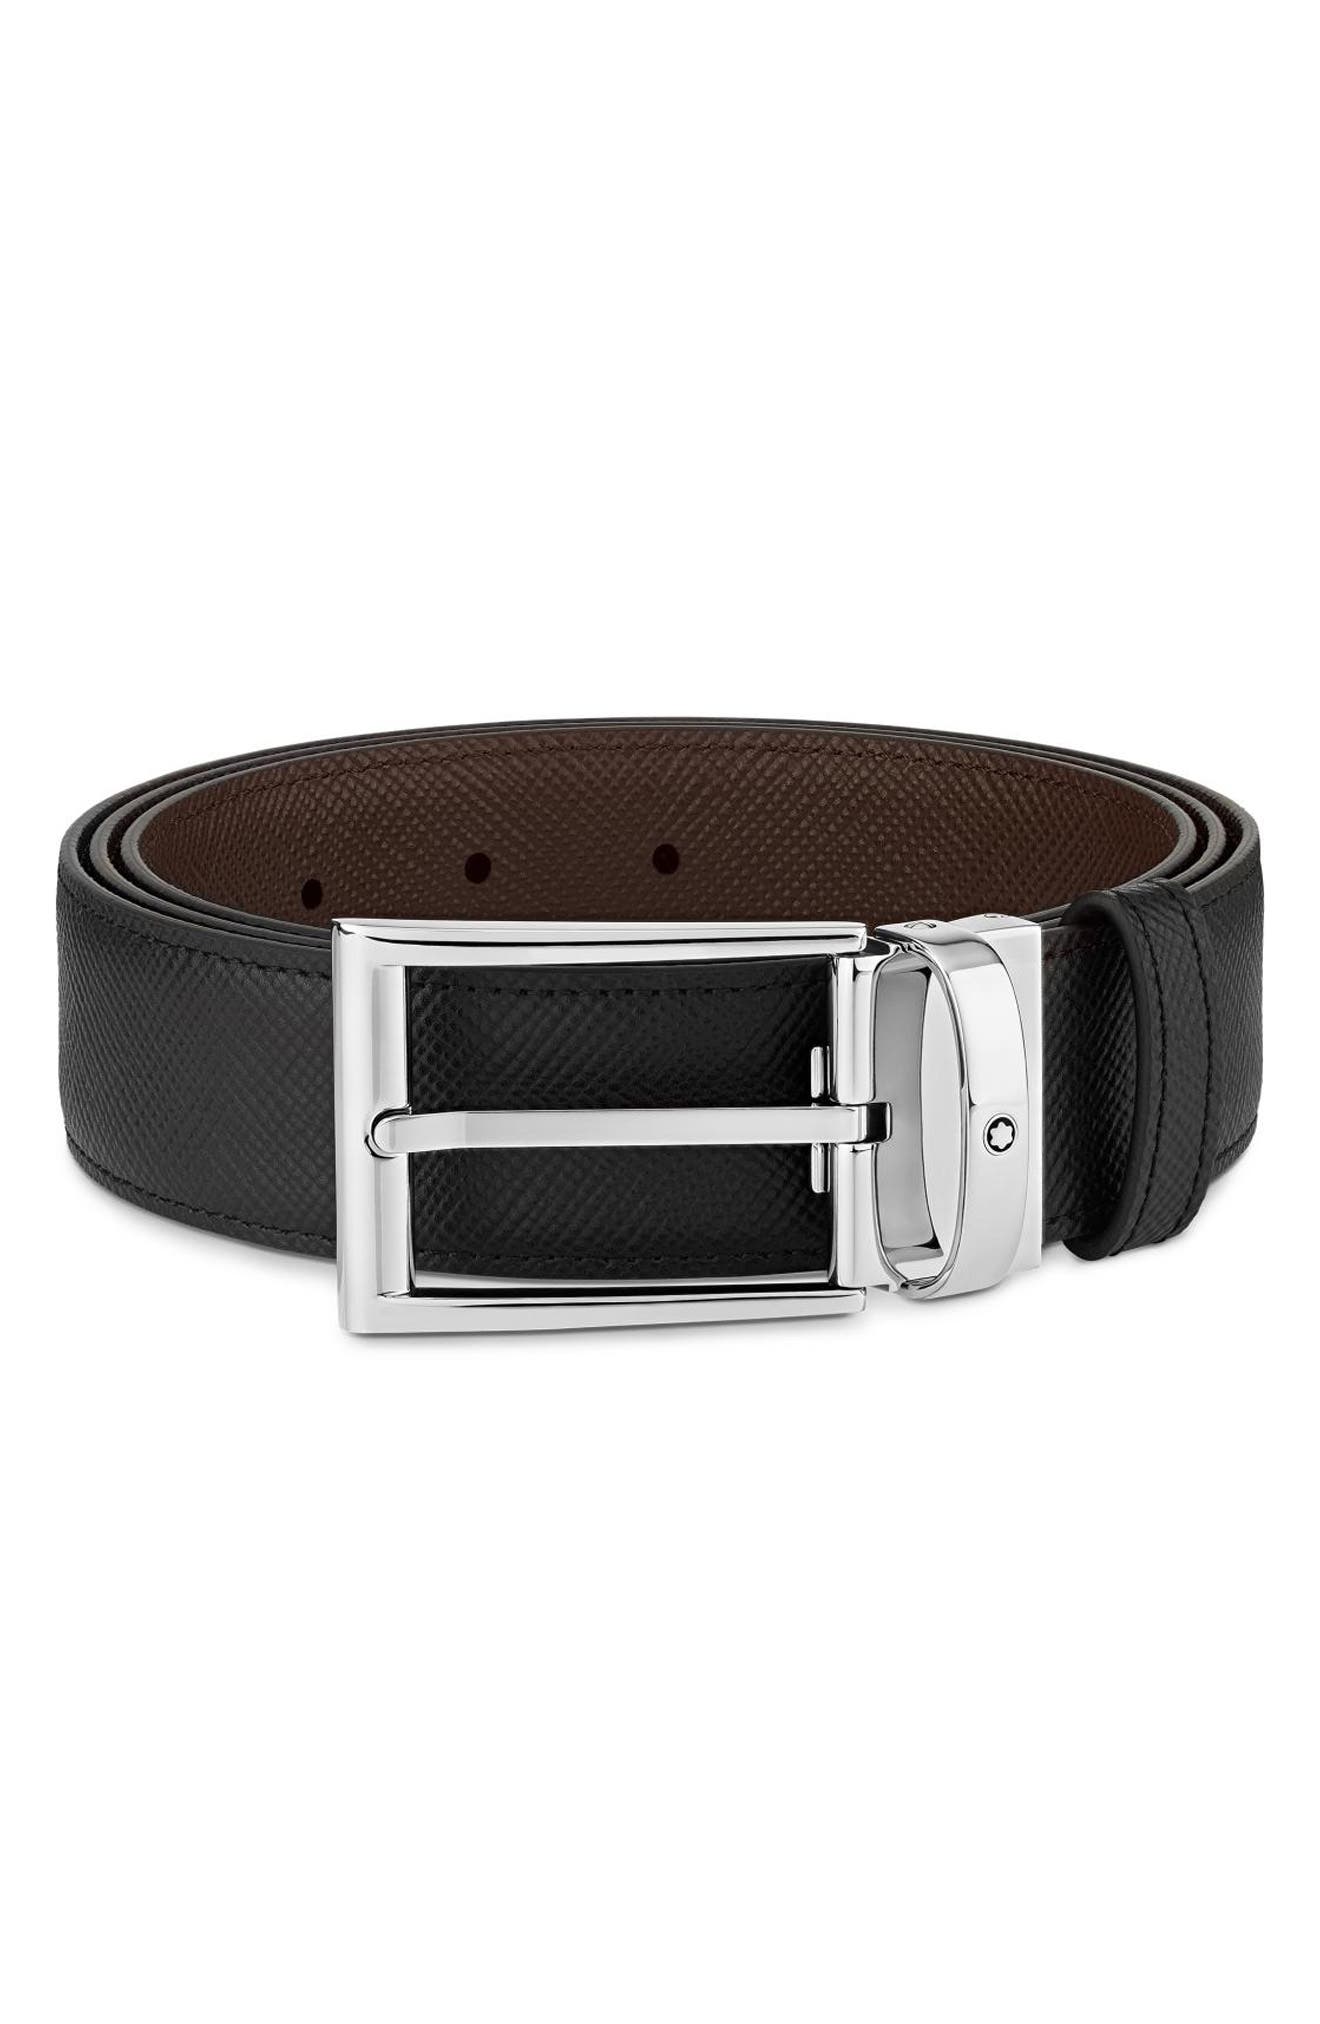 Reversible Belt Leather Belt with Green 32 mm 1.25 with Belt Z-Buckle with Personalized Belt Buckle Christmas Gift